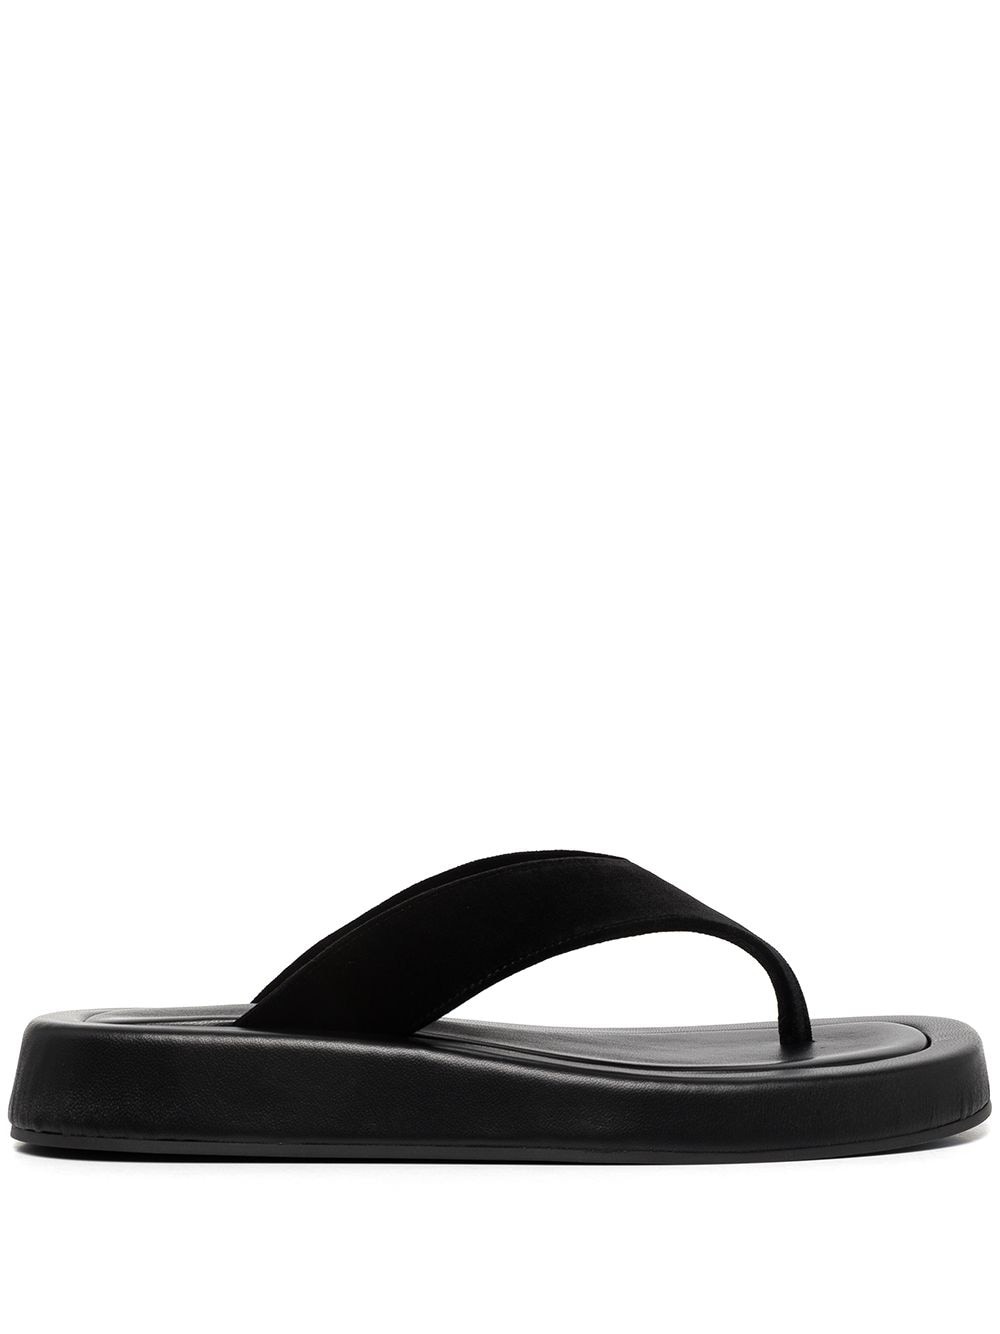 Ginza leather flip flops - 1